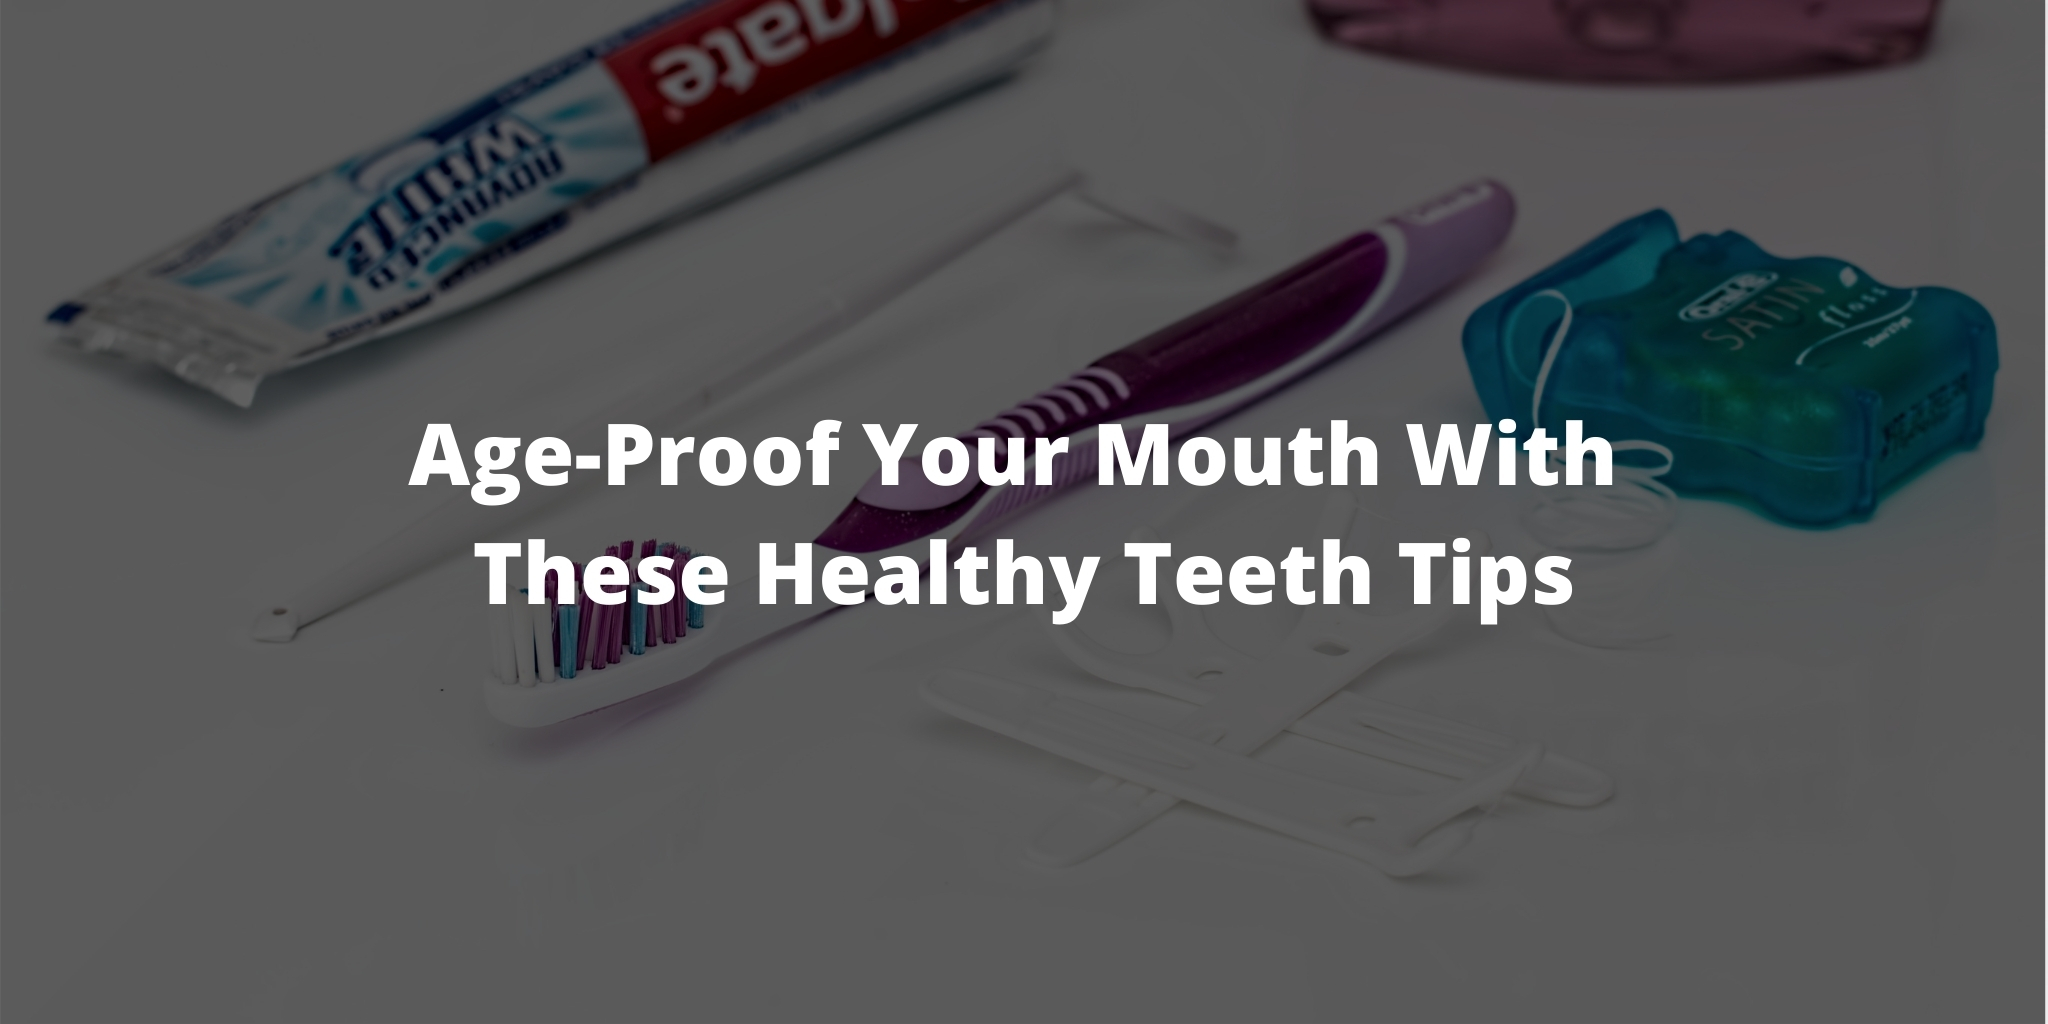 Age-Proof Your Mouth With These Healthy Teeth Tips